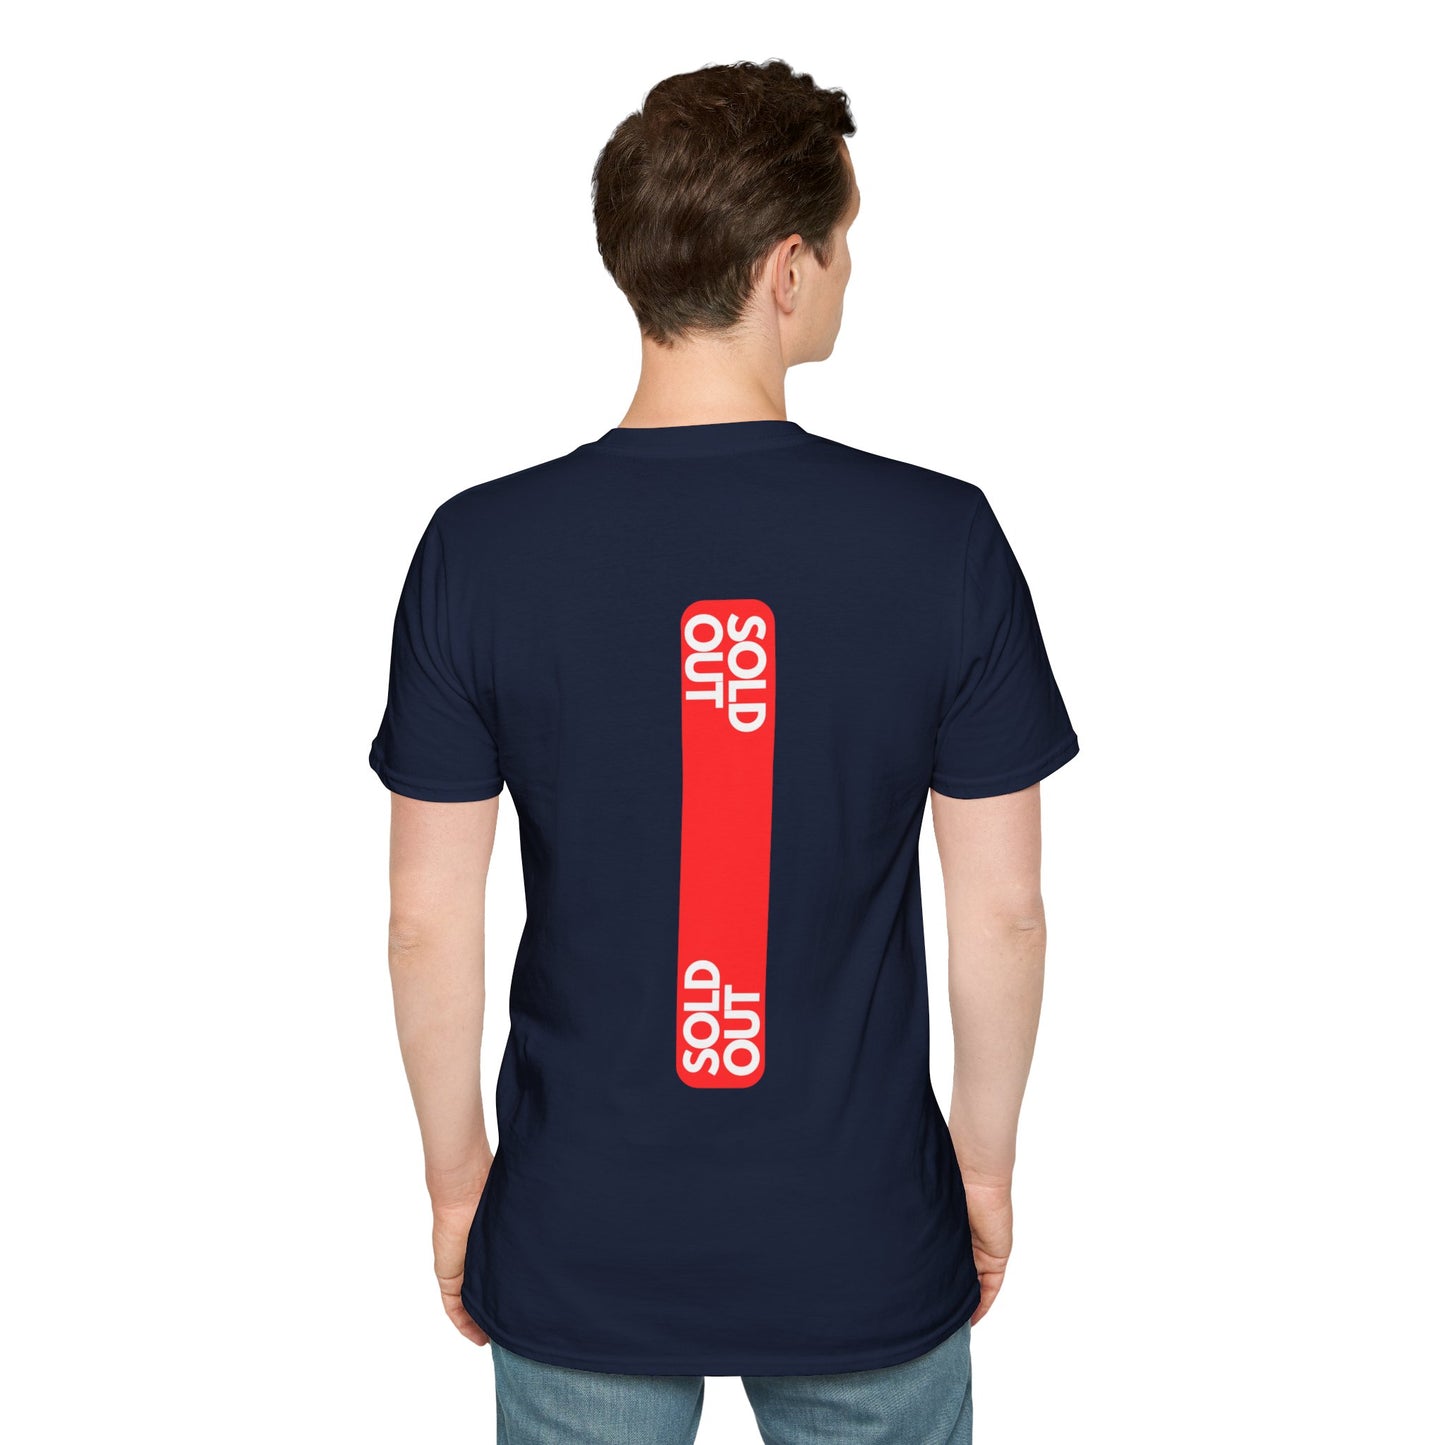 Navy T-shirt with a striking red tag design and the text ‘SOLD OUT’ in bold letters